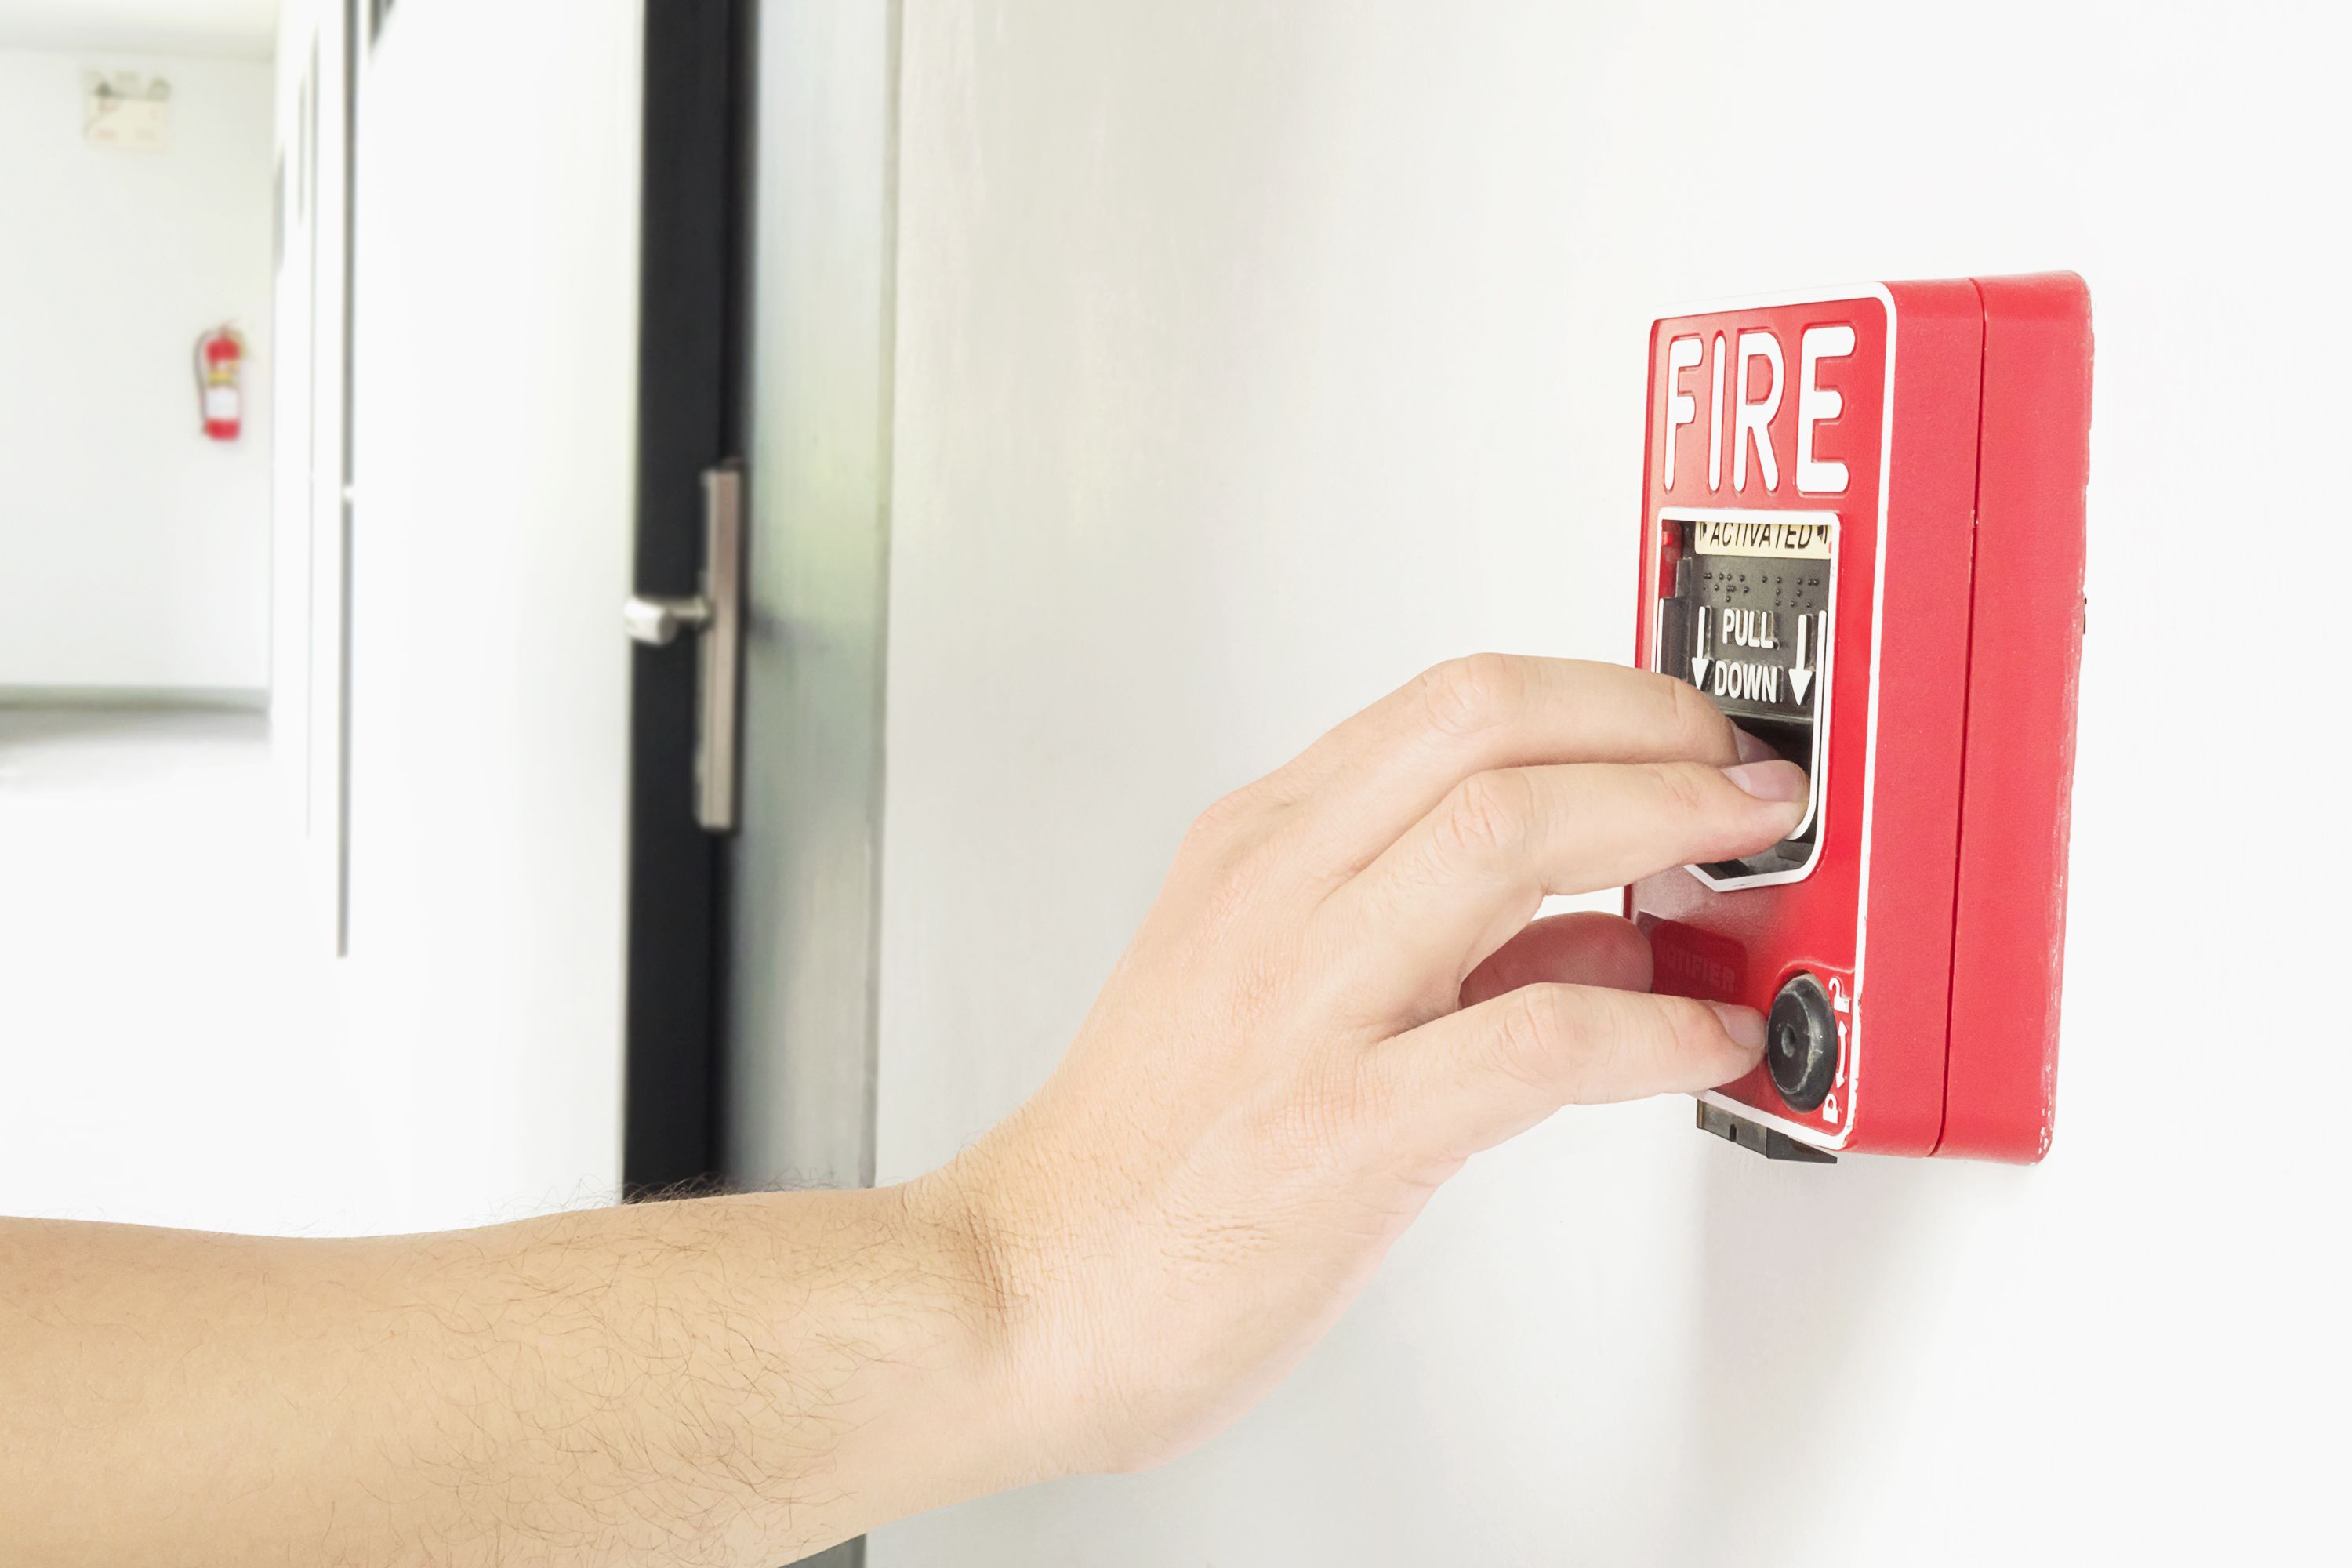 Man Is Reaching His Hand Push Fire Alarm Hand Station